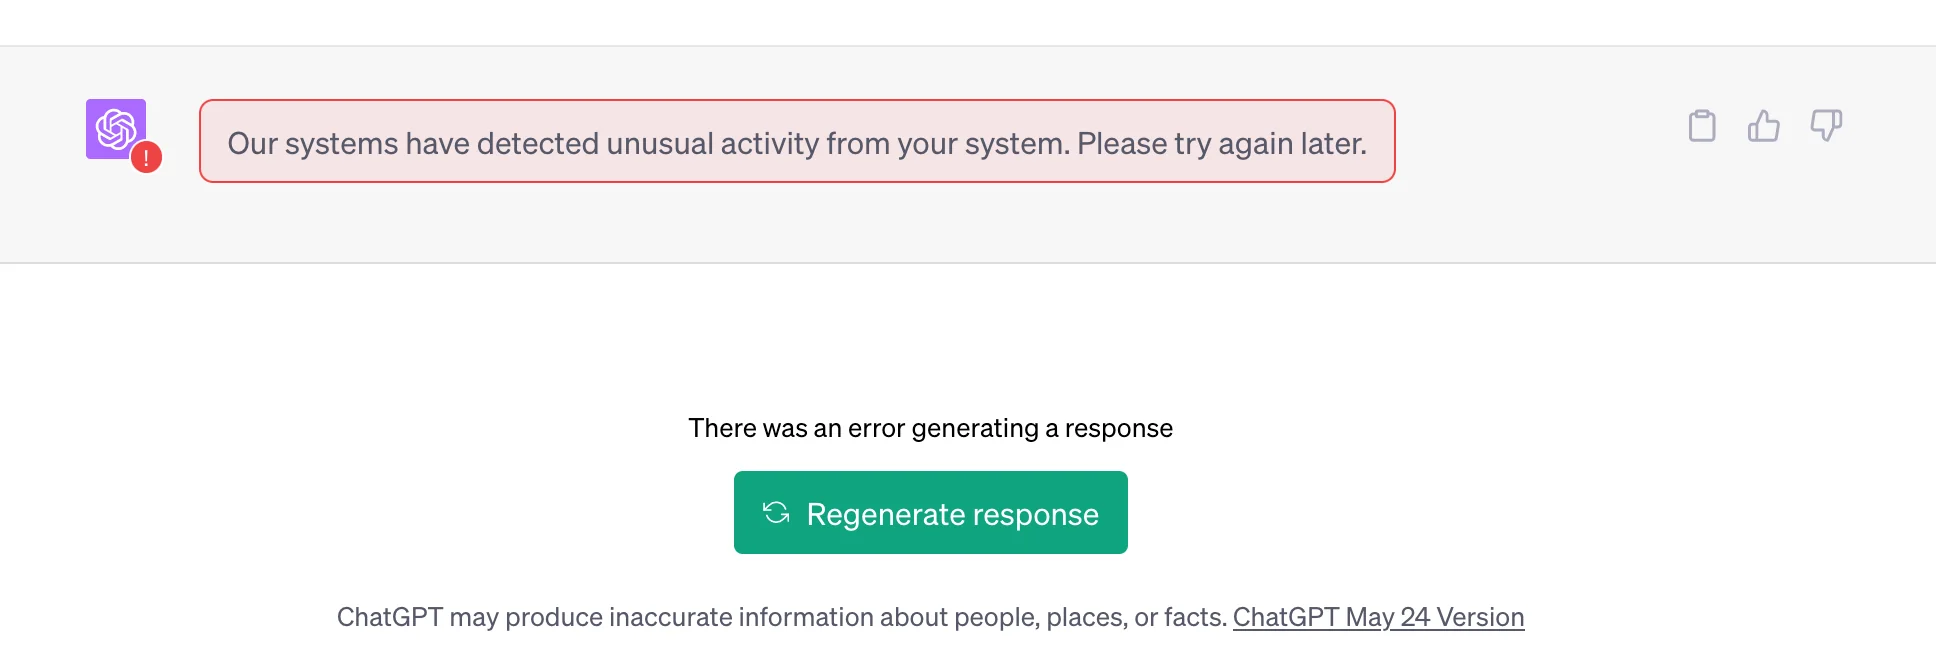 ChatGPT Our systems have detected unusual activity from your system. Please try again later